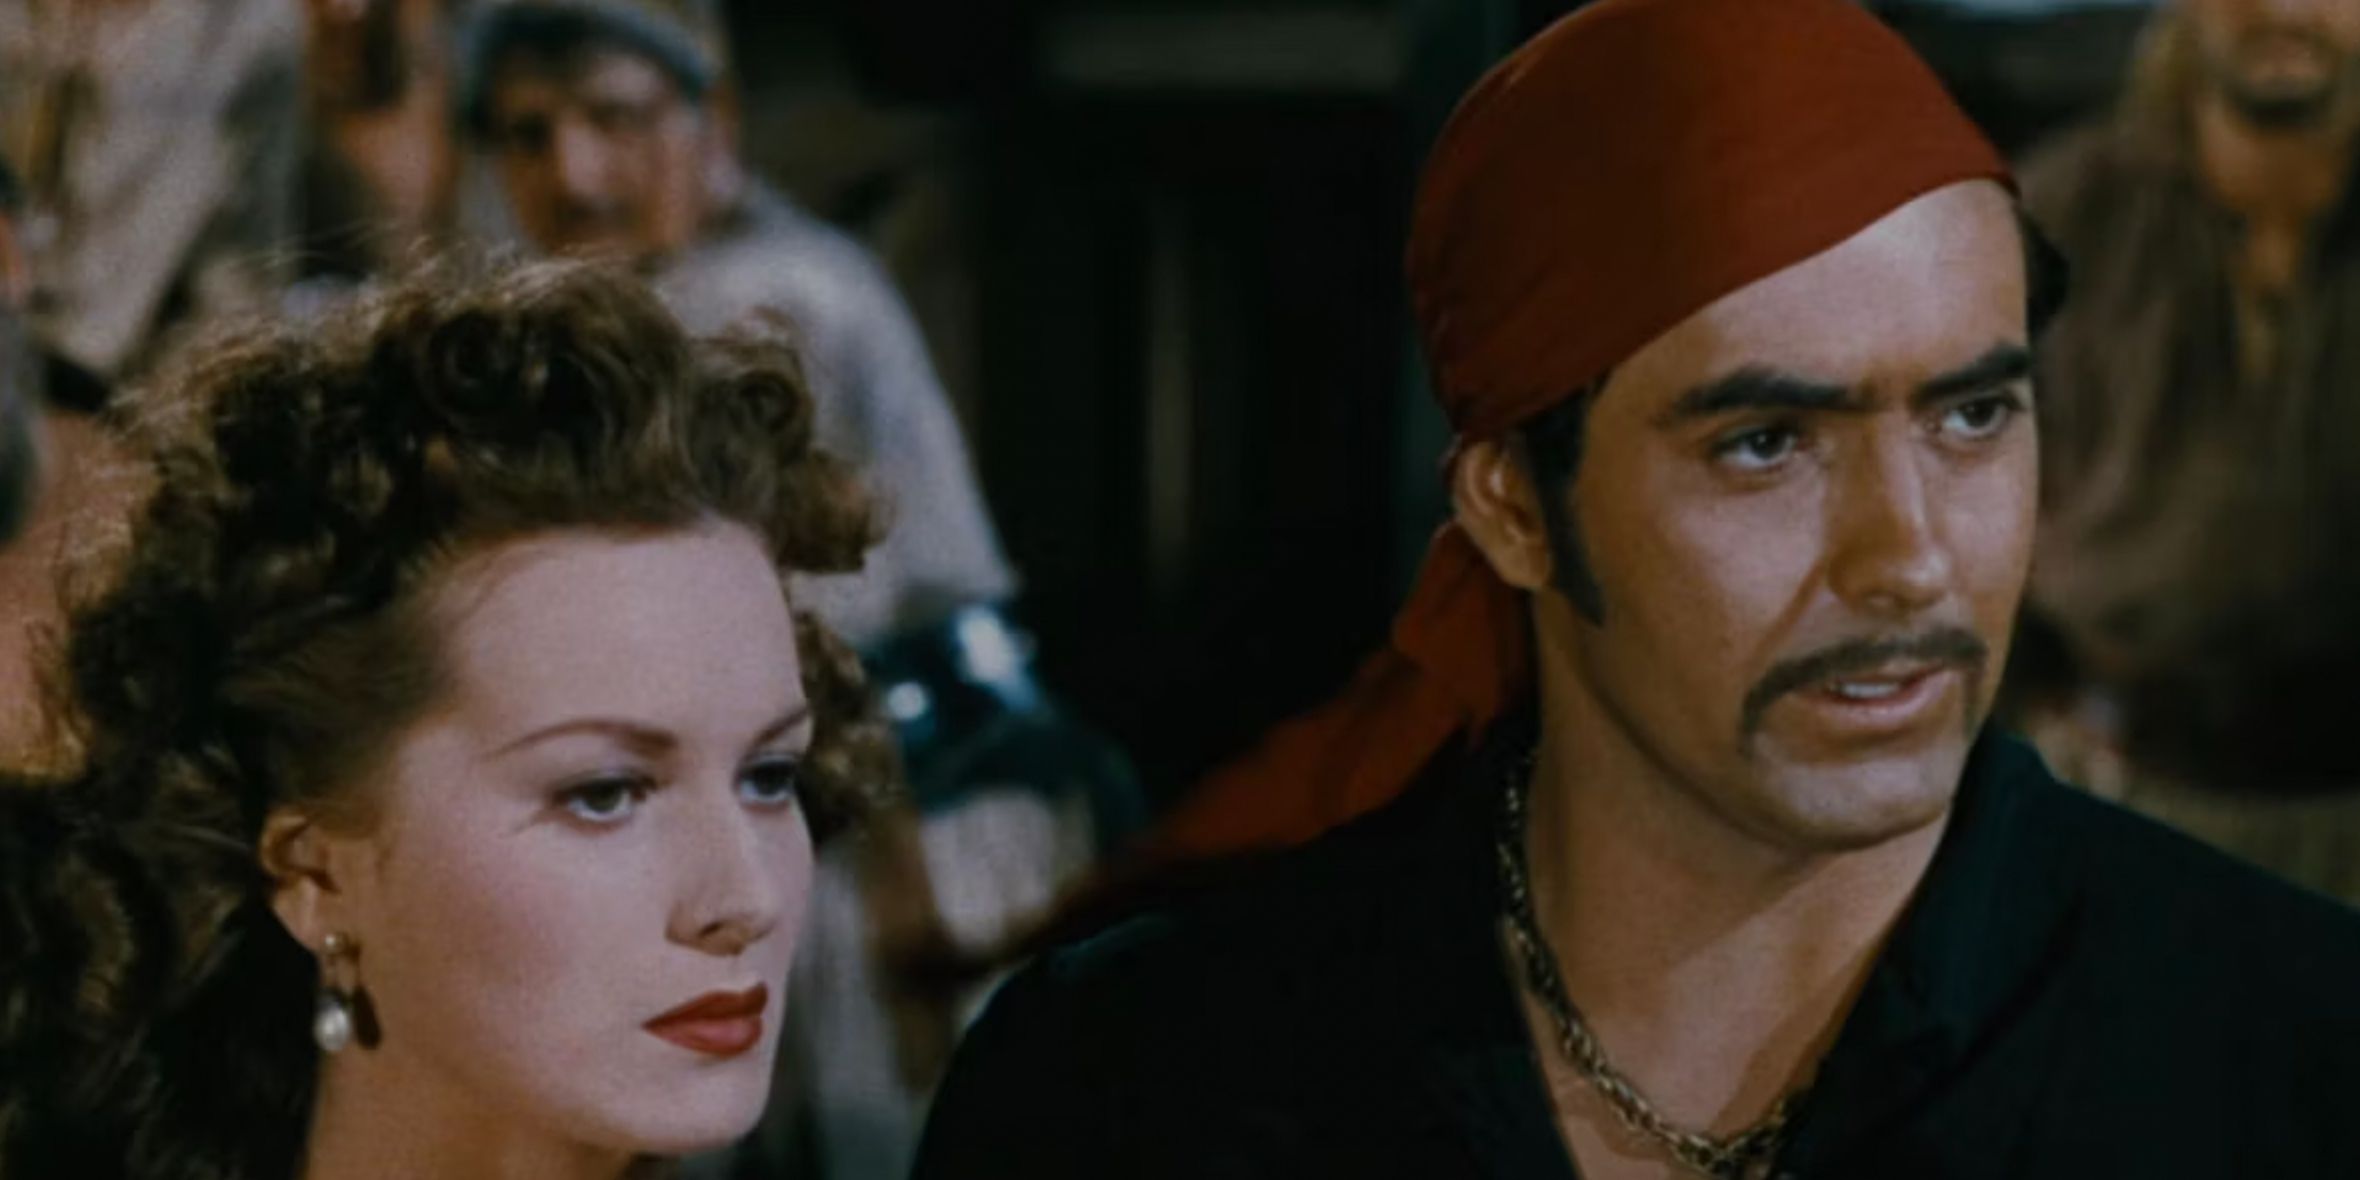 A young woman next to a pirate in The Black Swan in 1942